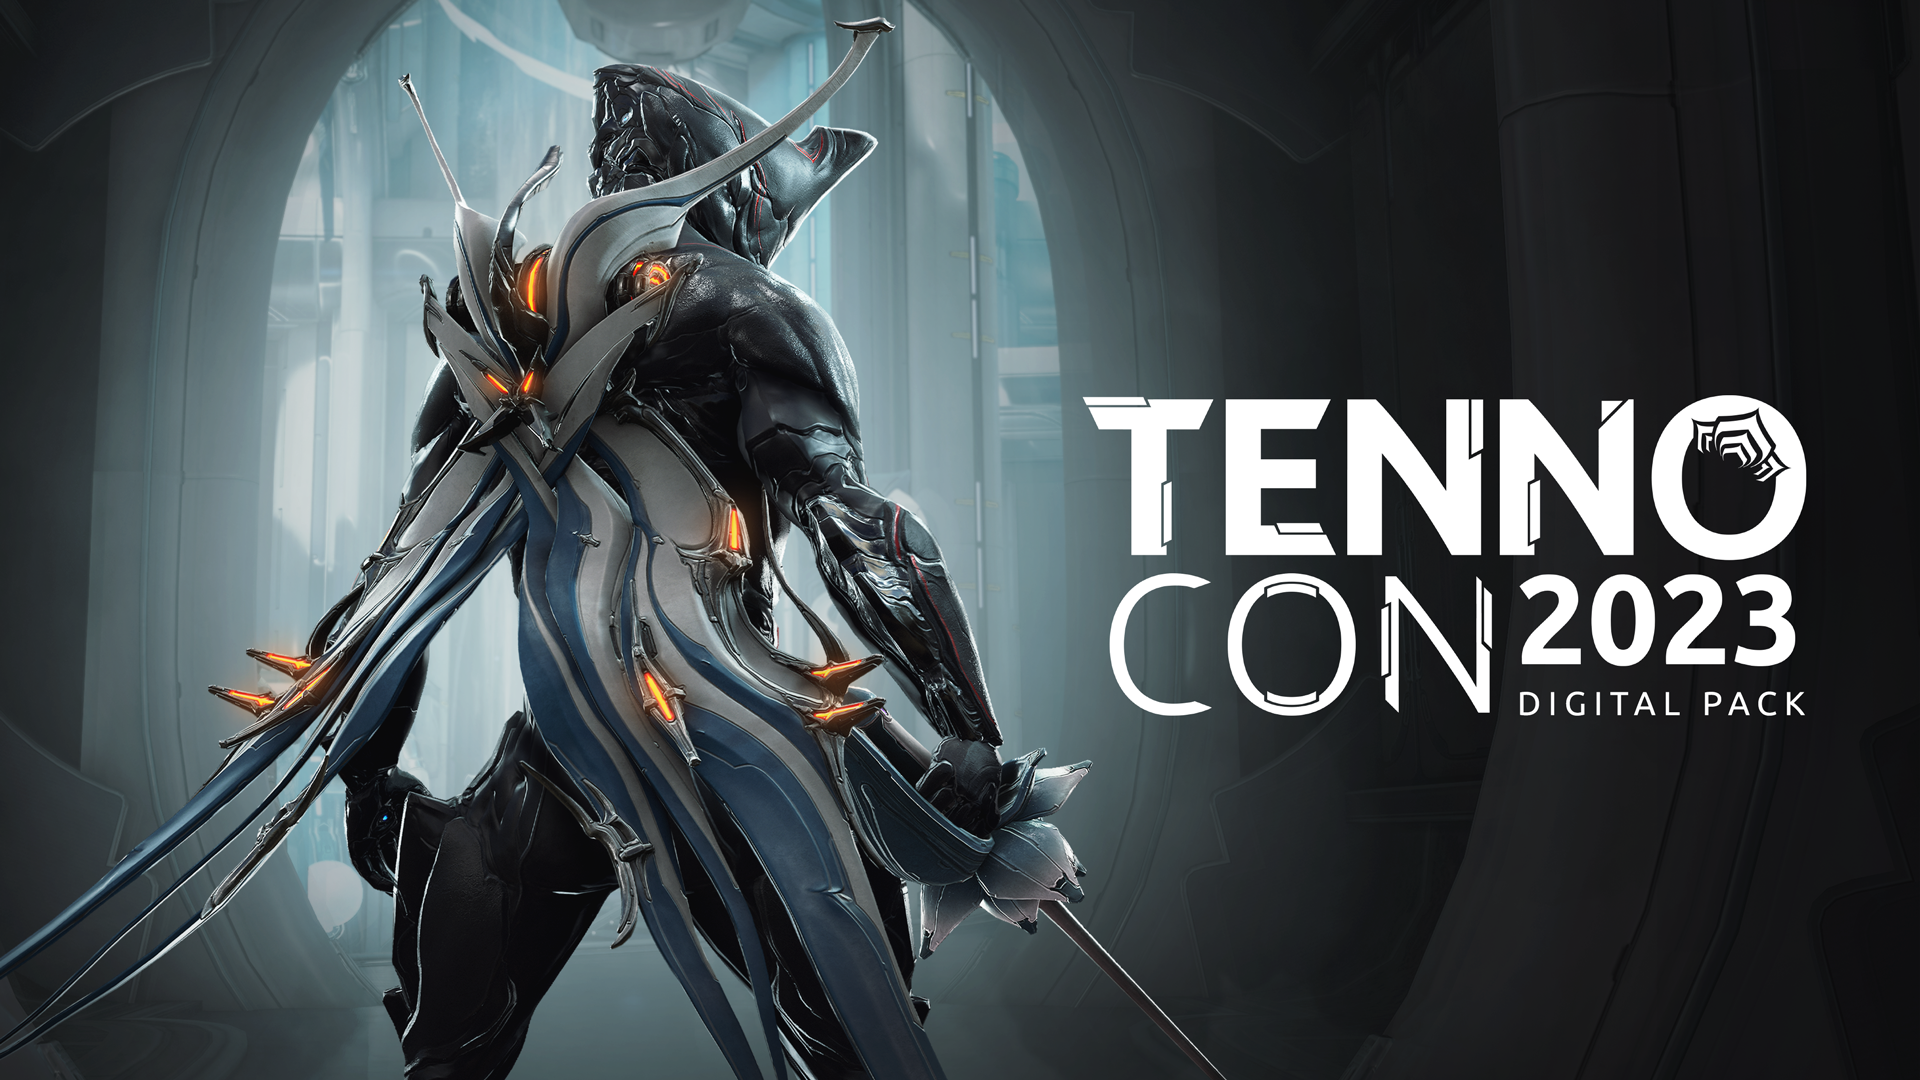 WARFRAME - Come celebrate TennoCon 2022 with us by instantly